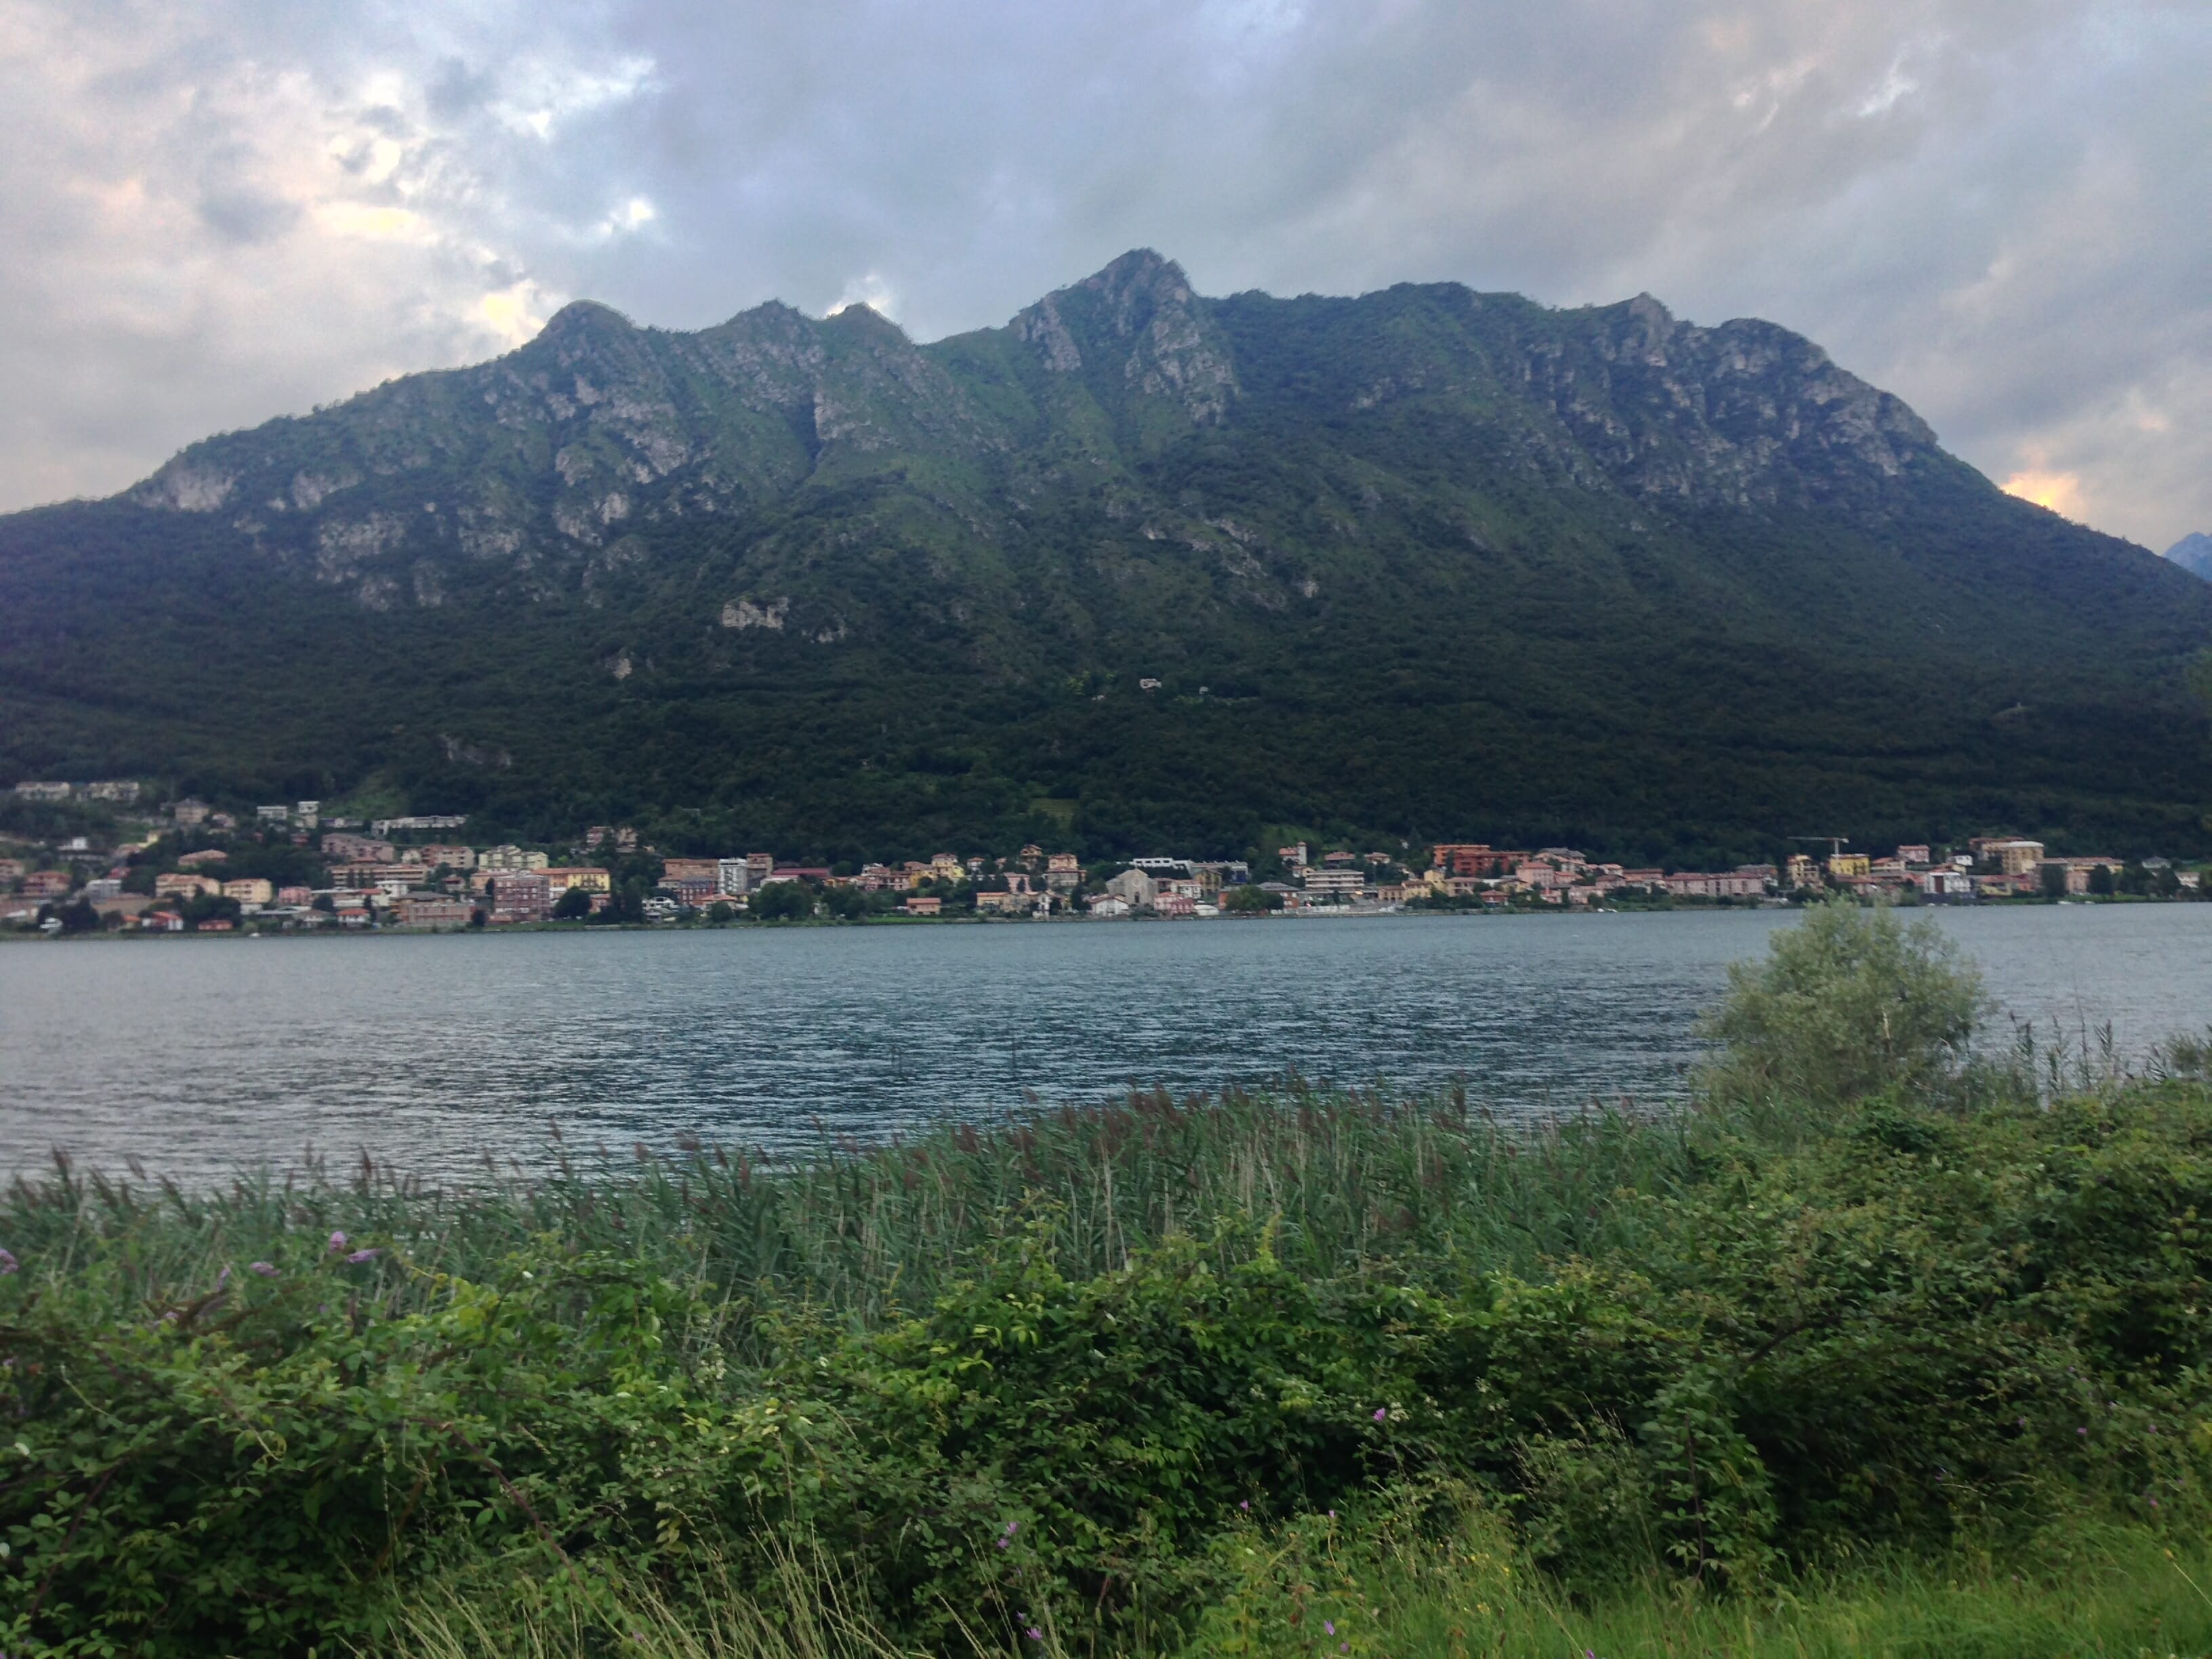 The view from Lecco.